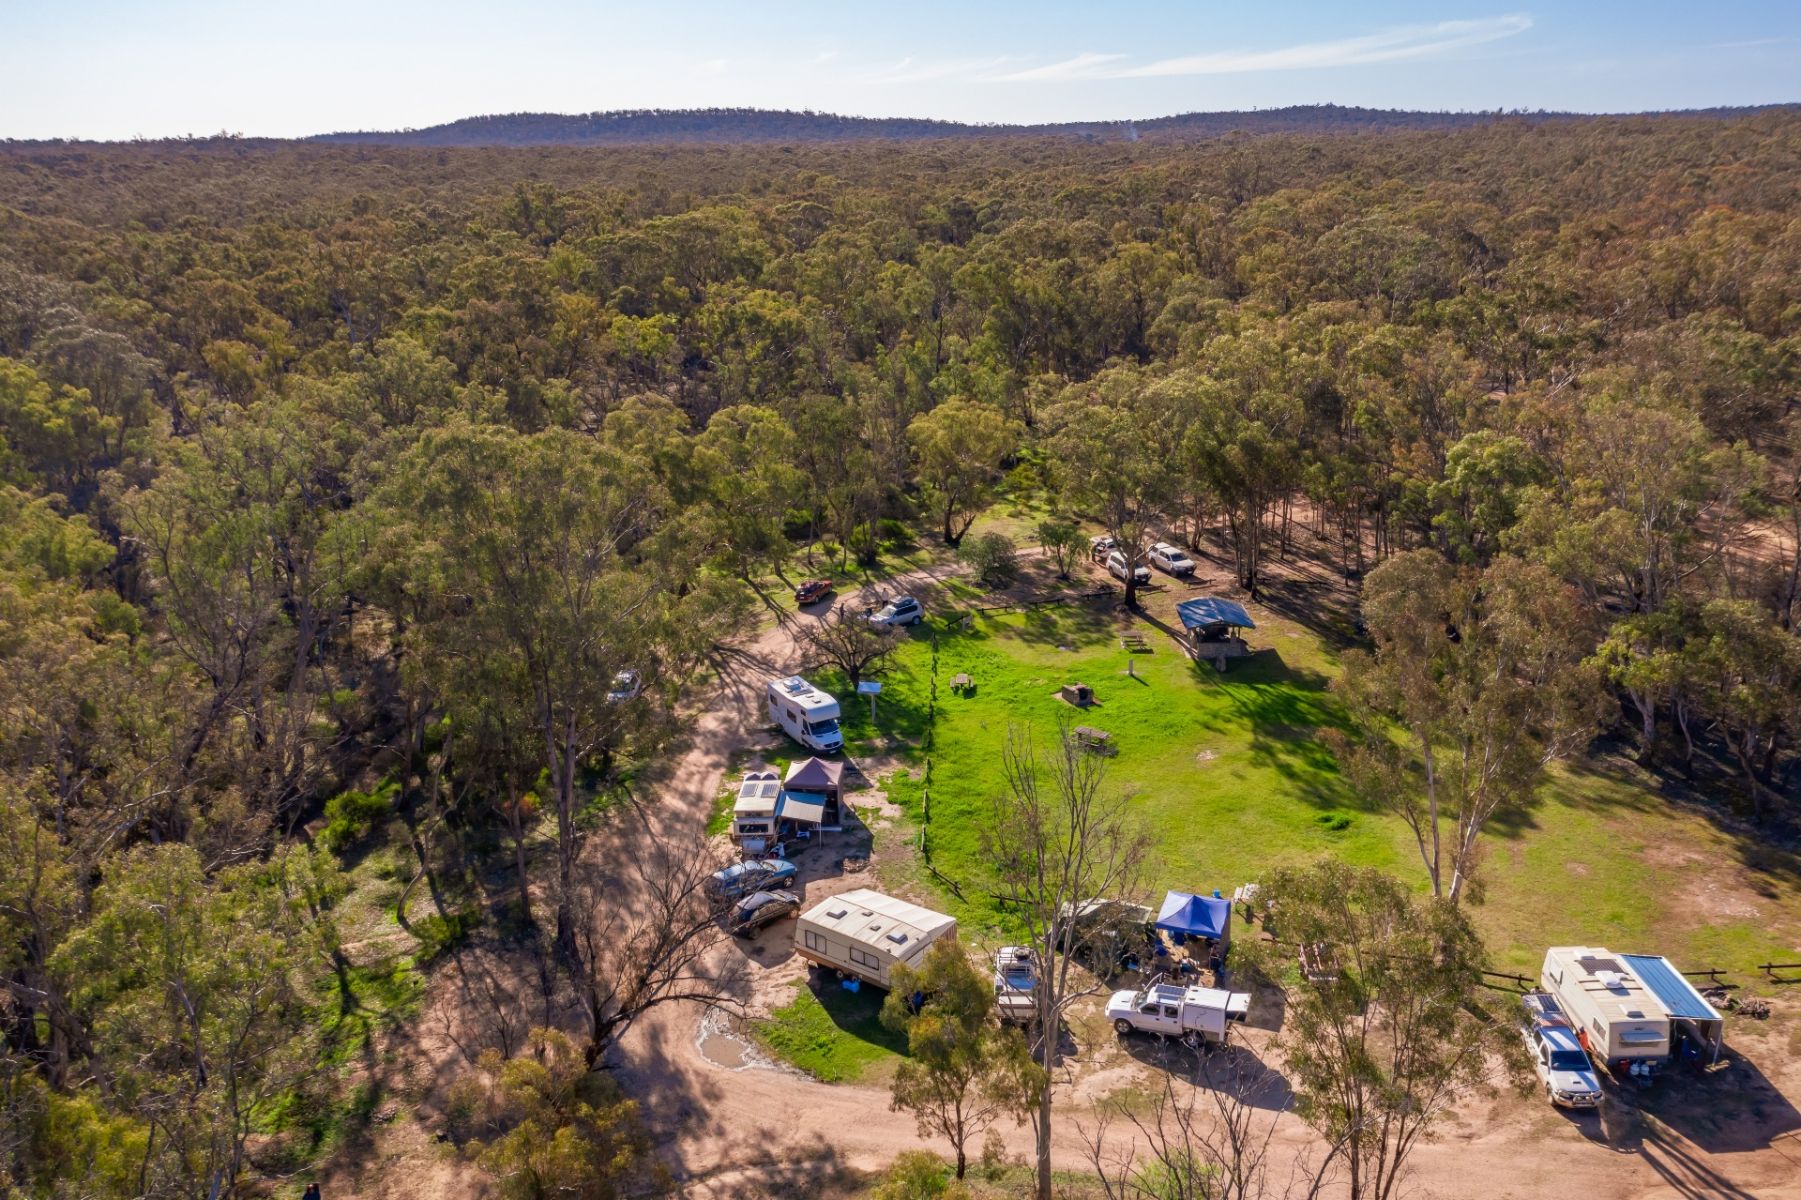 Aerial view of the campground with cars and campervans